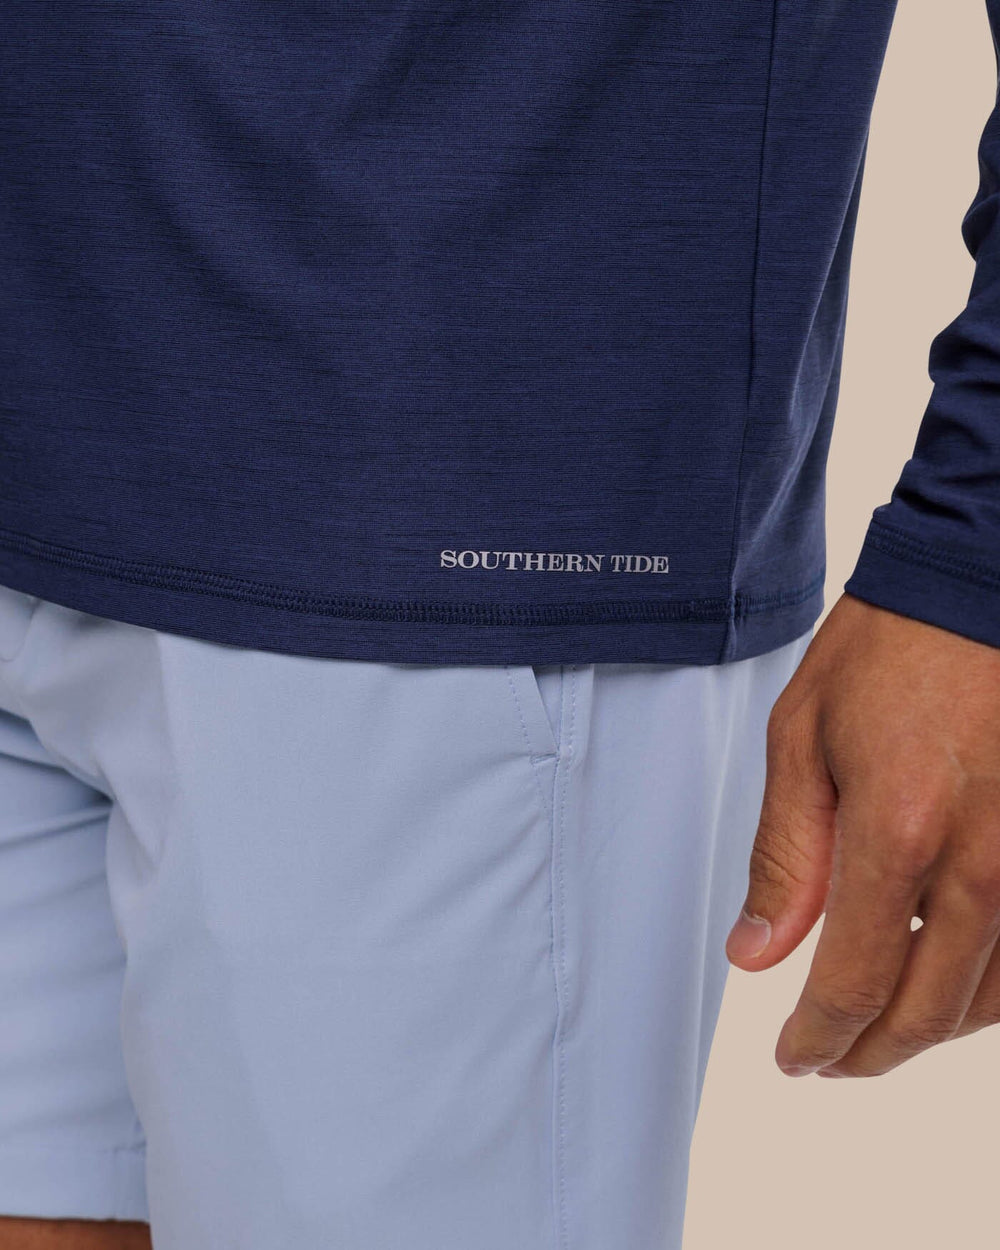 The label view of the Southern Tide brrr-illiant Performance Long Sleeve Tee by Southern Tide - Nautical Navy